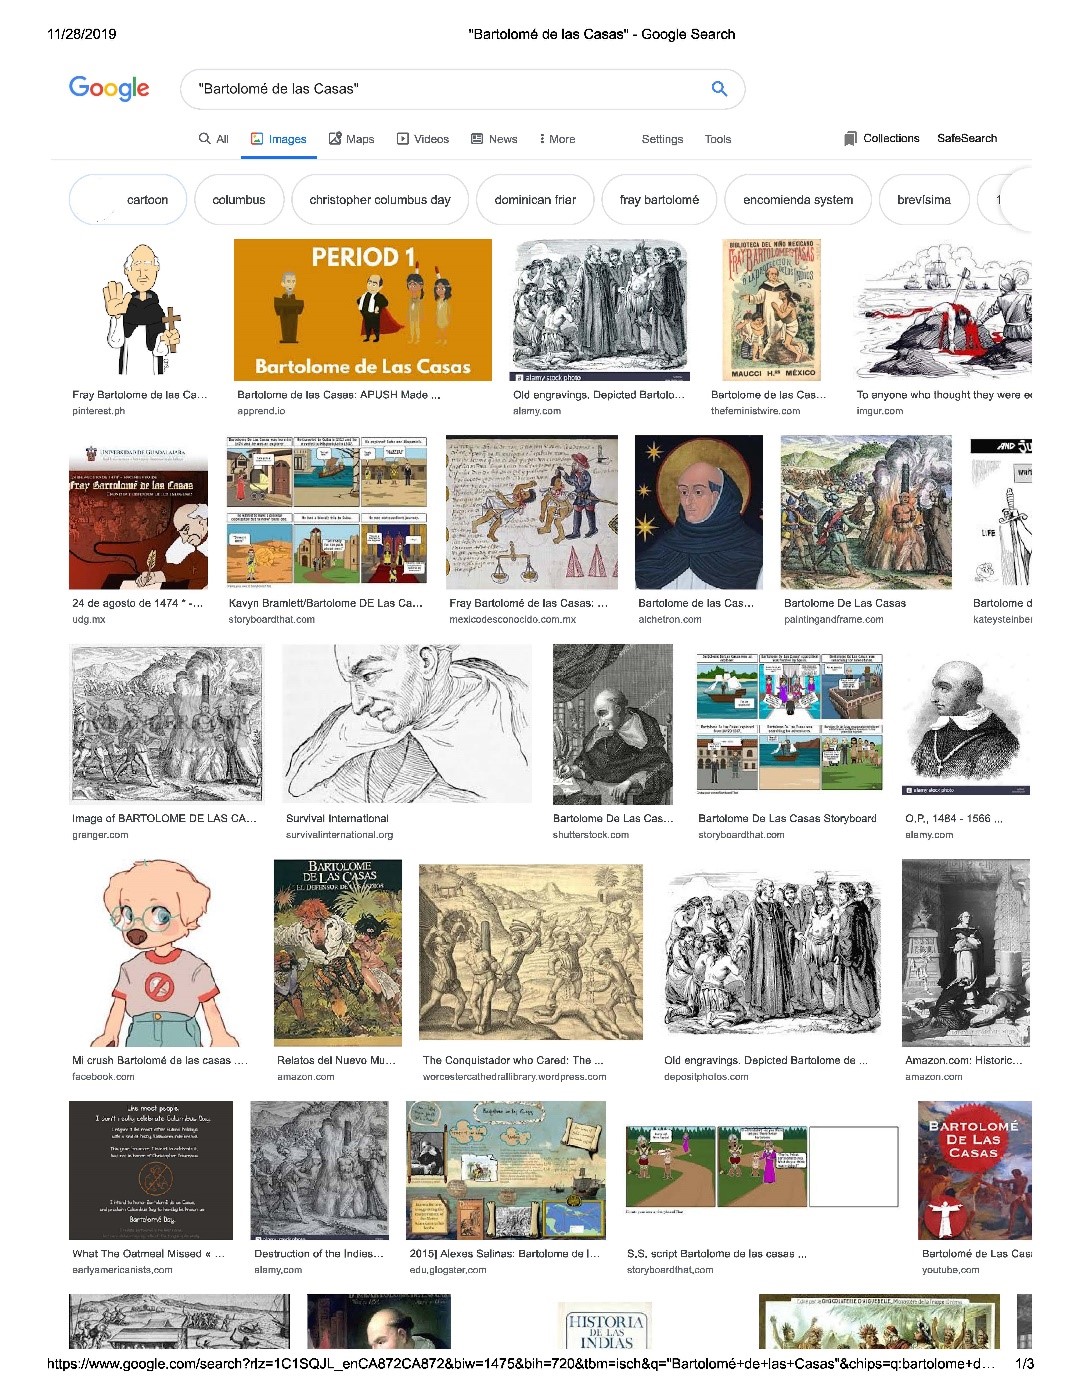 Google Image search results for “Bartolomé de las Casas” limited to the “cartoon” sub-collection of this data set as captured